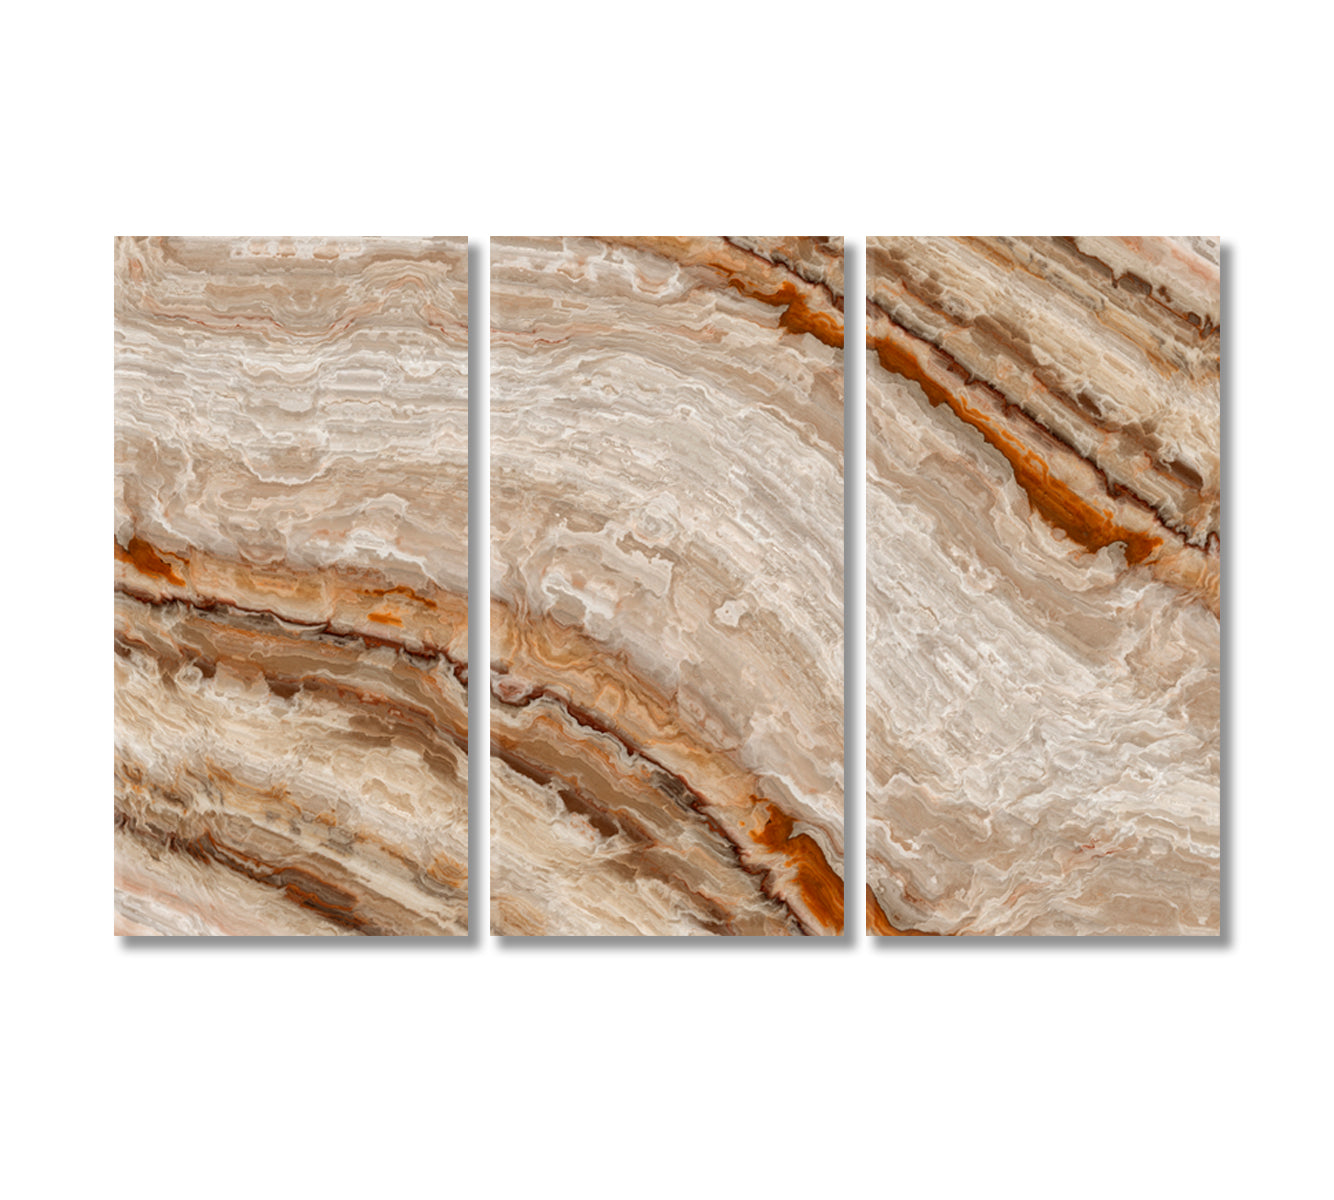 Brown Marble Abstract Pattern Canvas Print-Canvas Print-CetArt-3 Panels-36x24 inches-CetArt